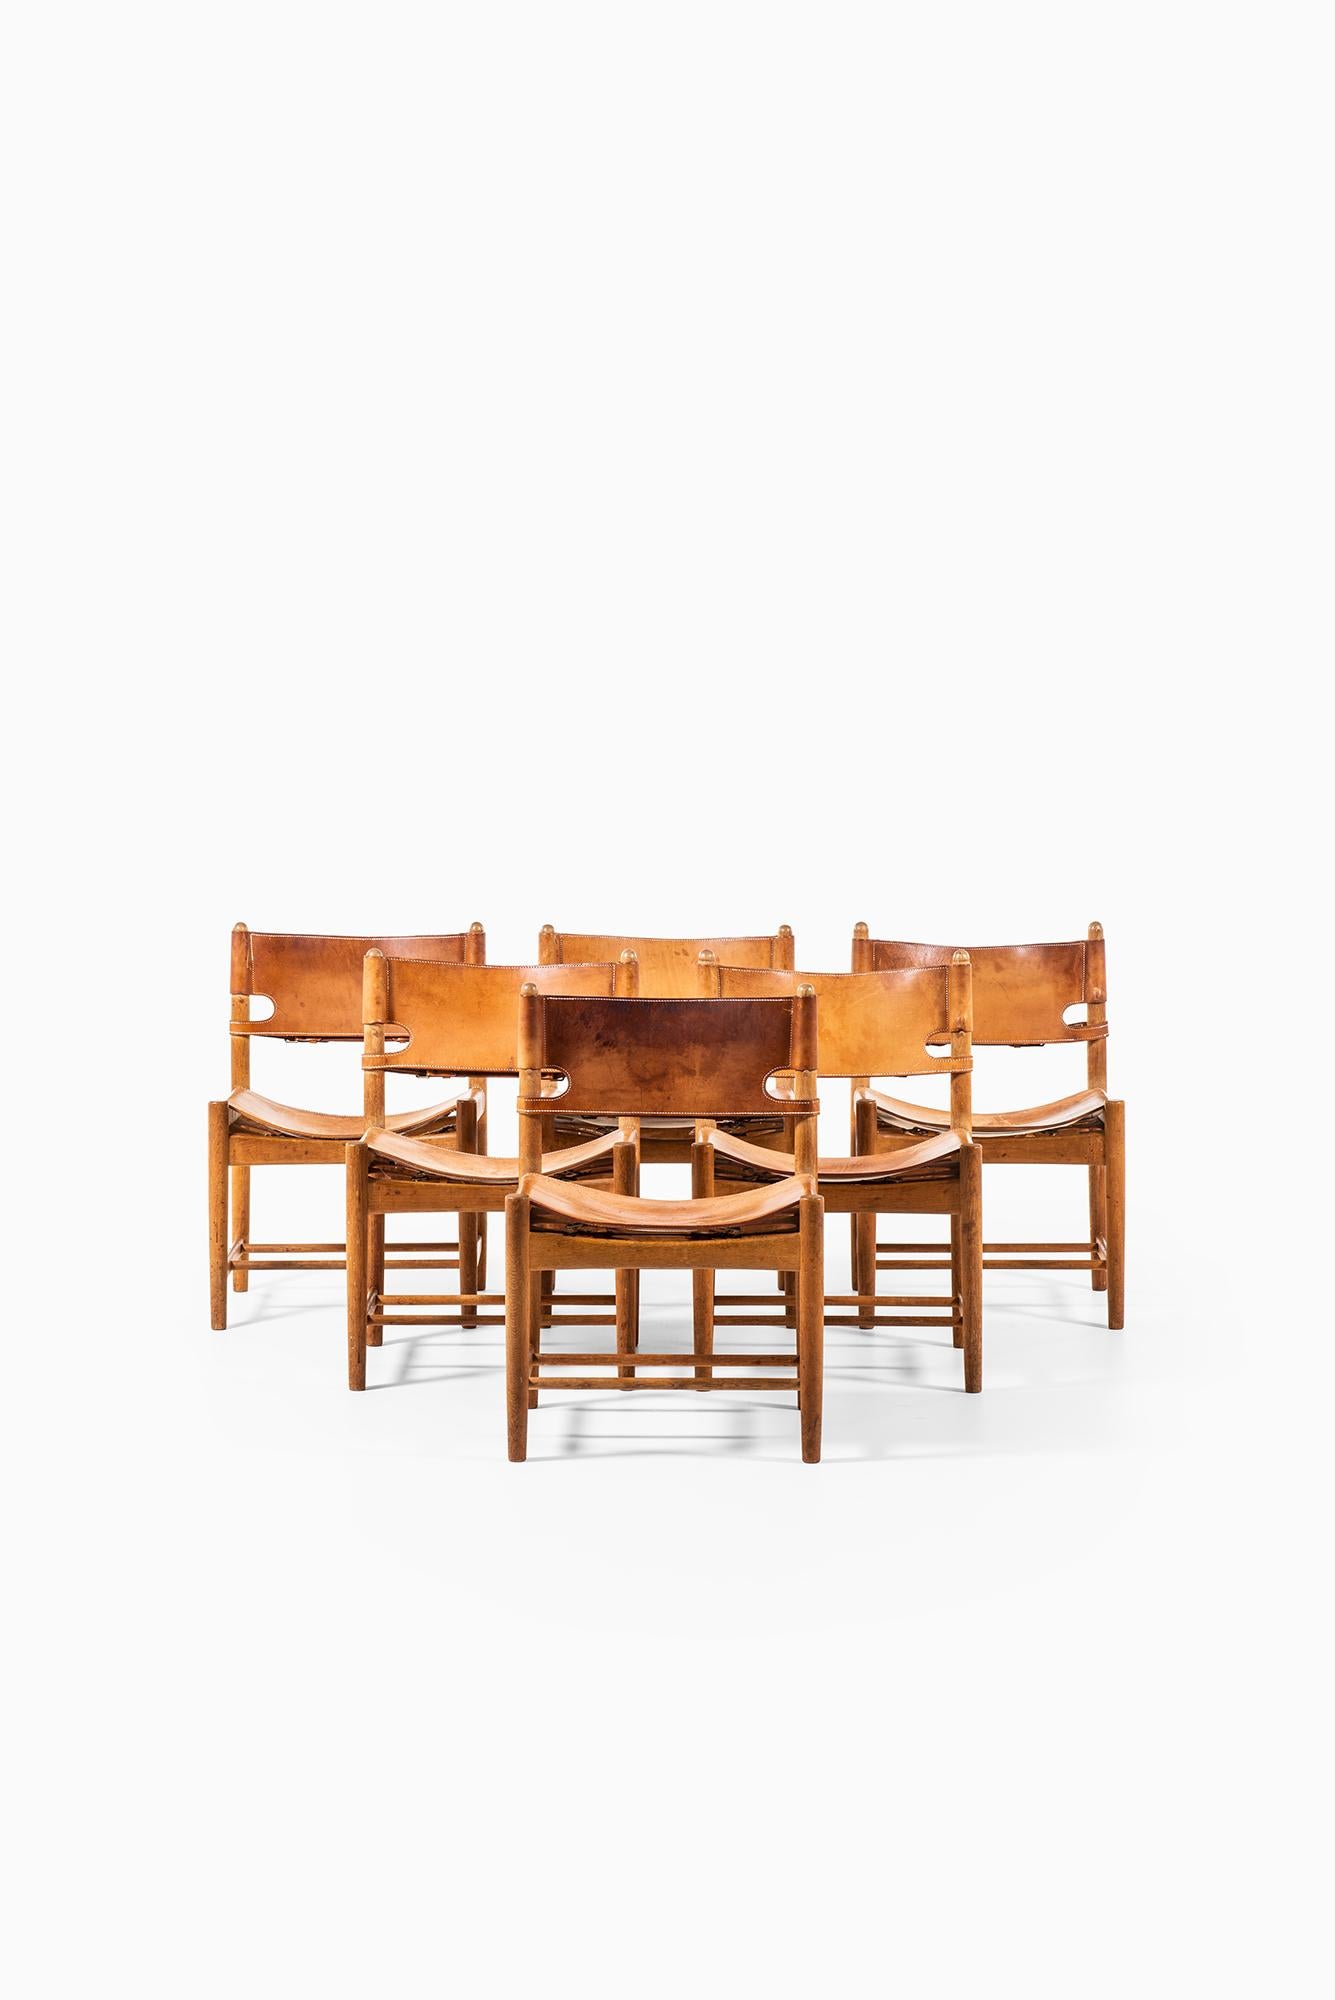 Rare set of six dining chairs model 3237 designed by Børge Mogensen. Produced by Fredericia Stolefabrik in Denmark.